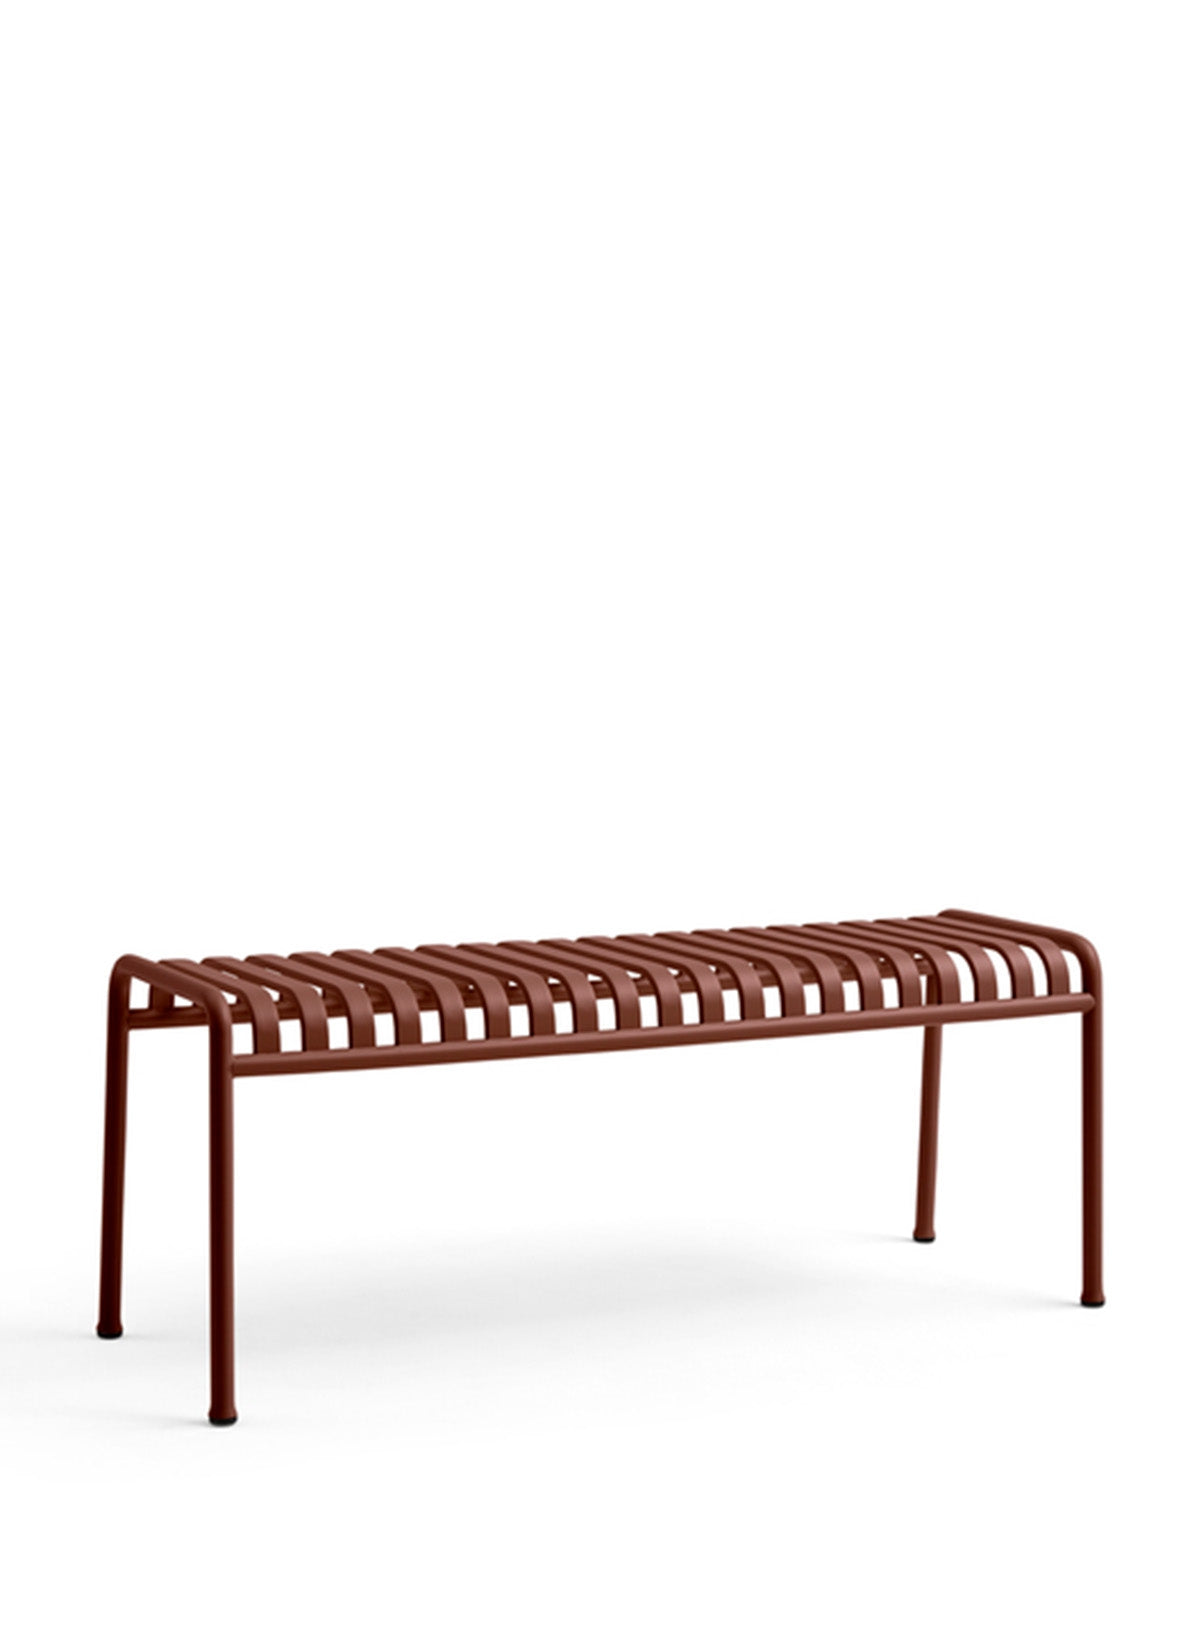 Palissade Bench, Iron Red - HAY